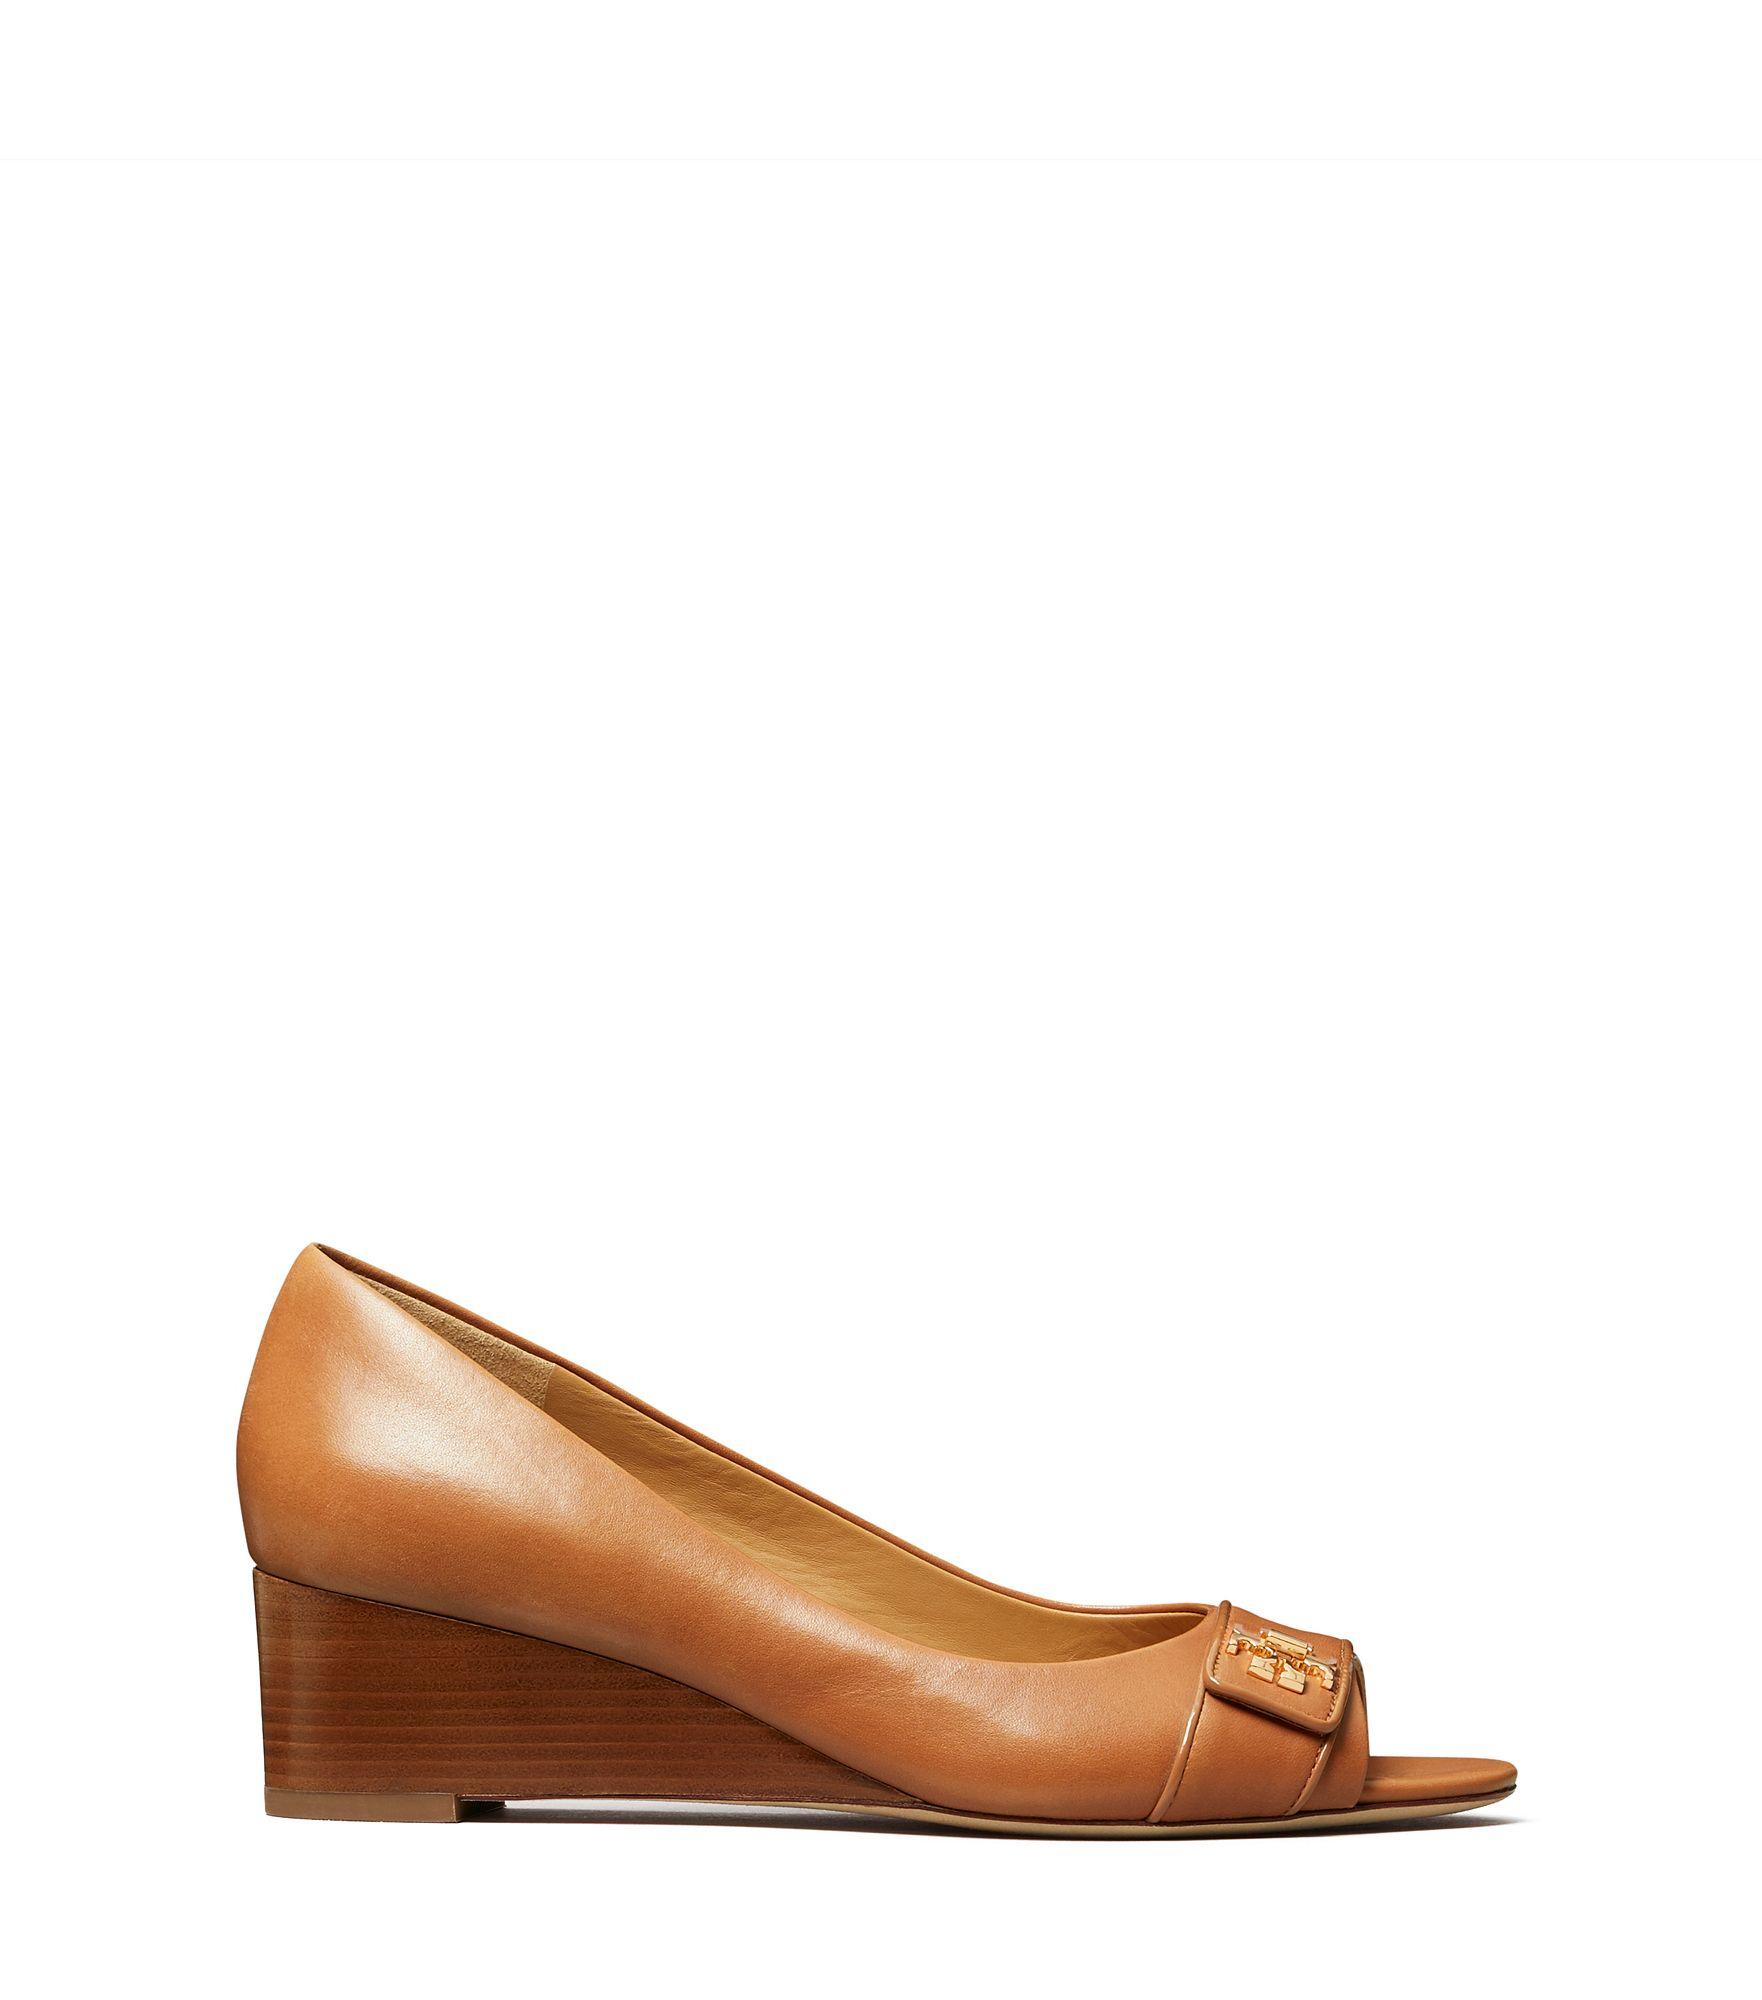 Tory Burch Kira Open-toe Leather Wedge Pumps in Brown | Lyst